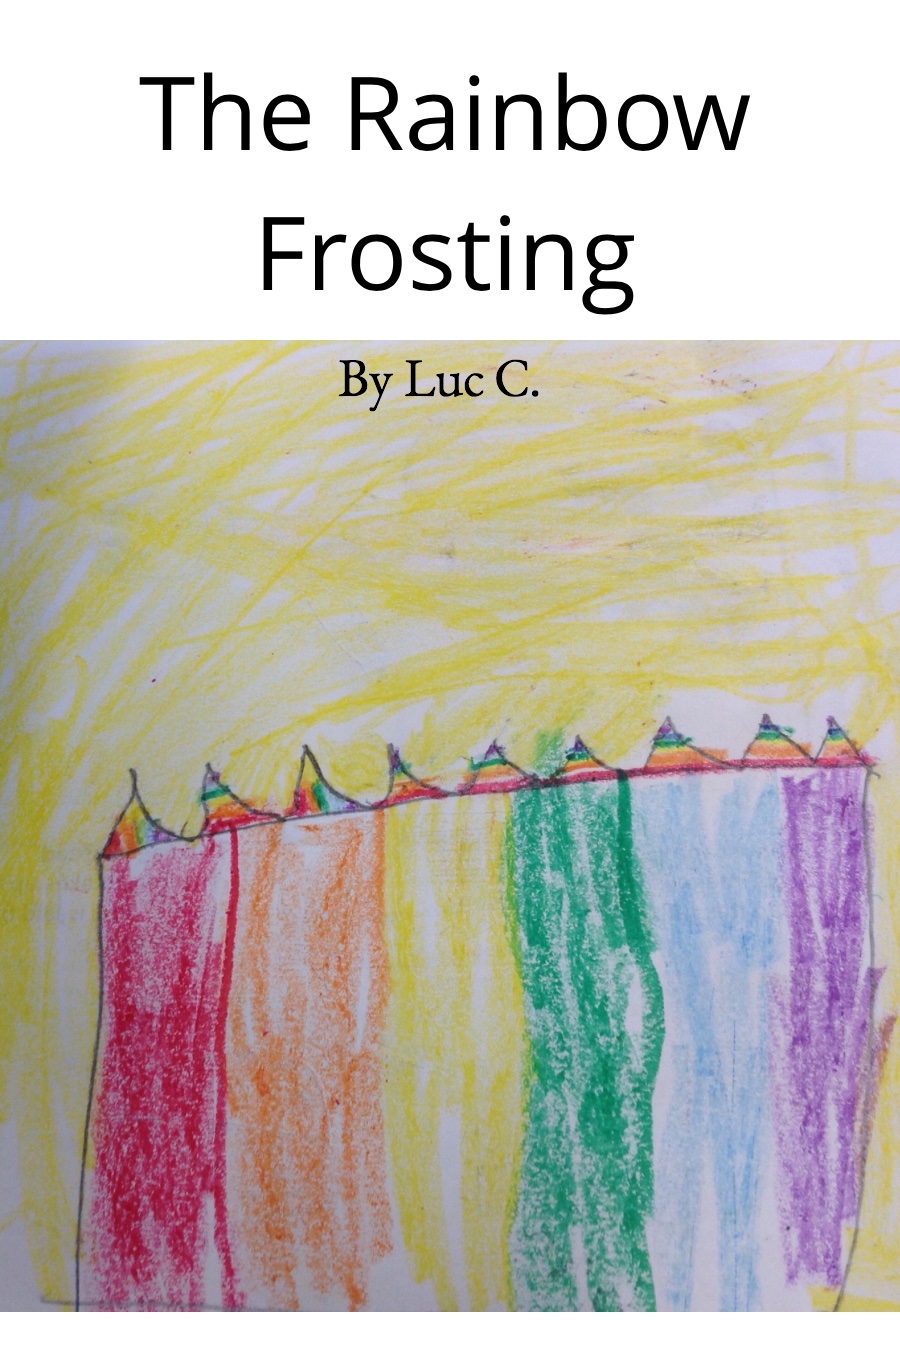 The Rainbow Frosting by Luc C